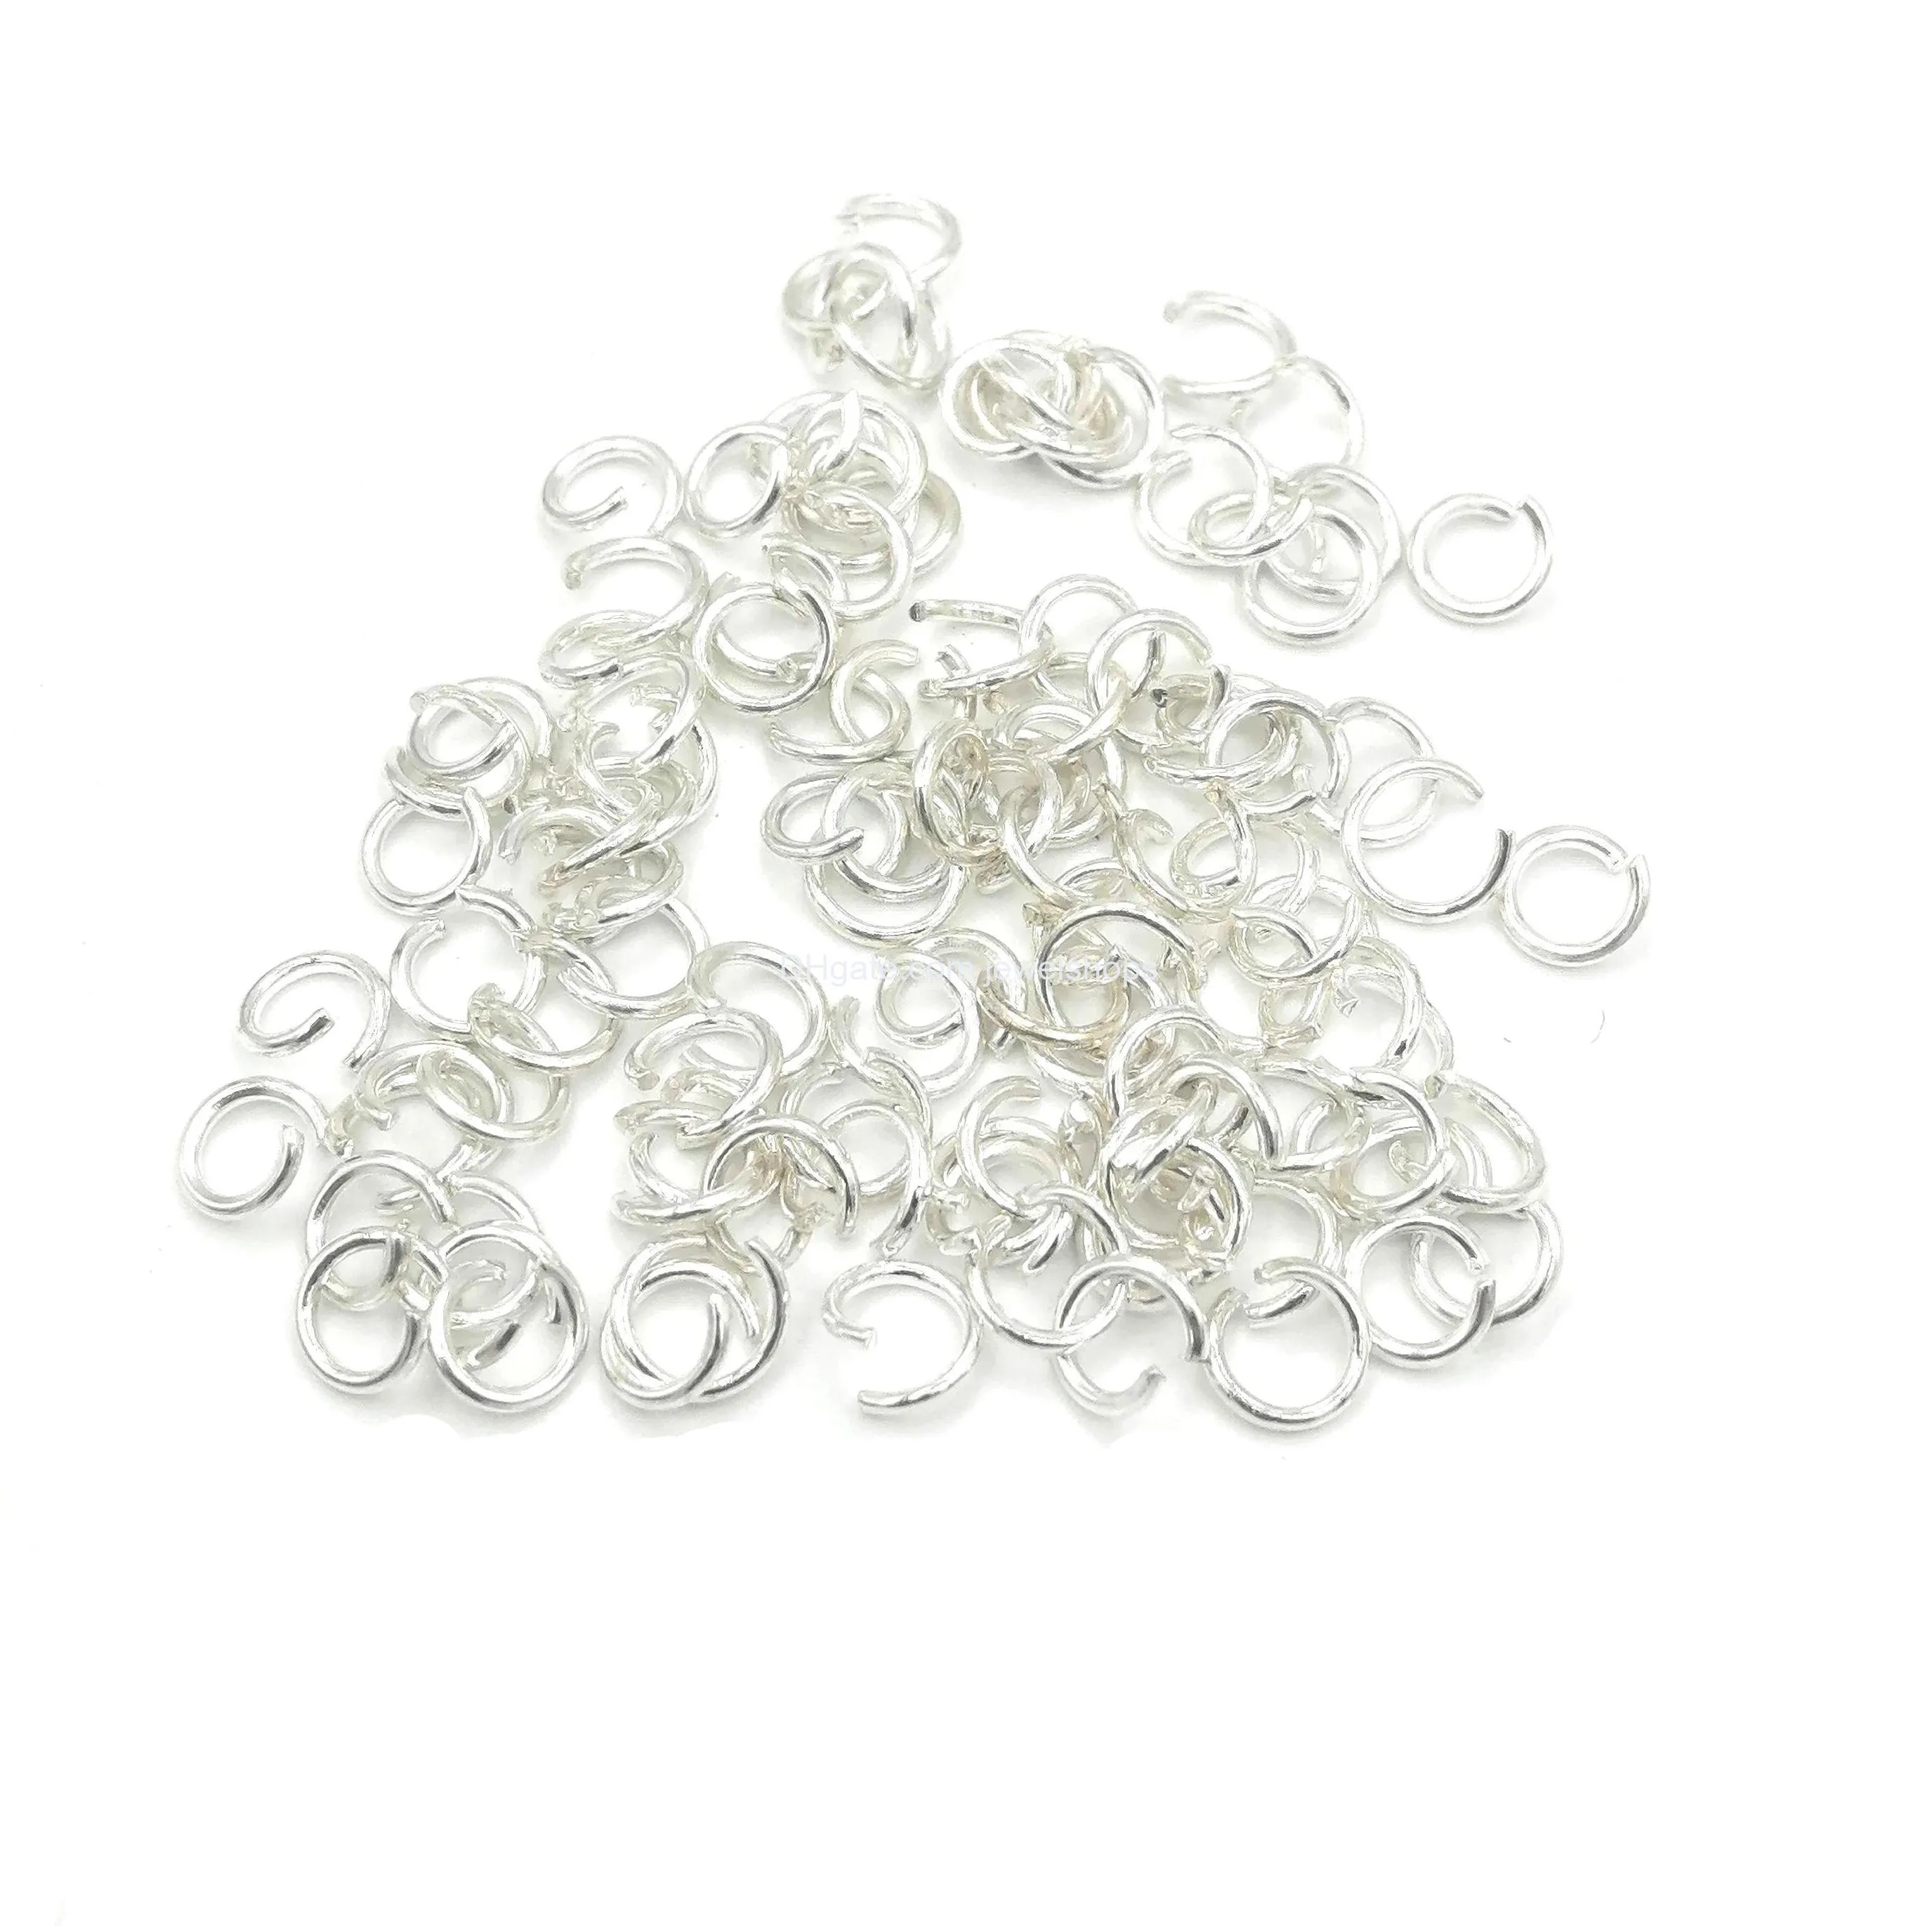 500pcs copper 4mm/5mm open jump rings & split rings gold/black/silver/bronze plated color connectors for jewelry dyi making